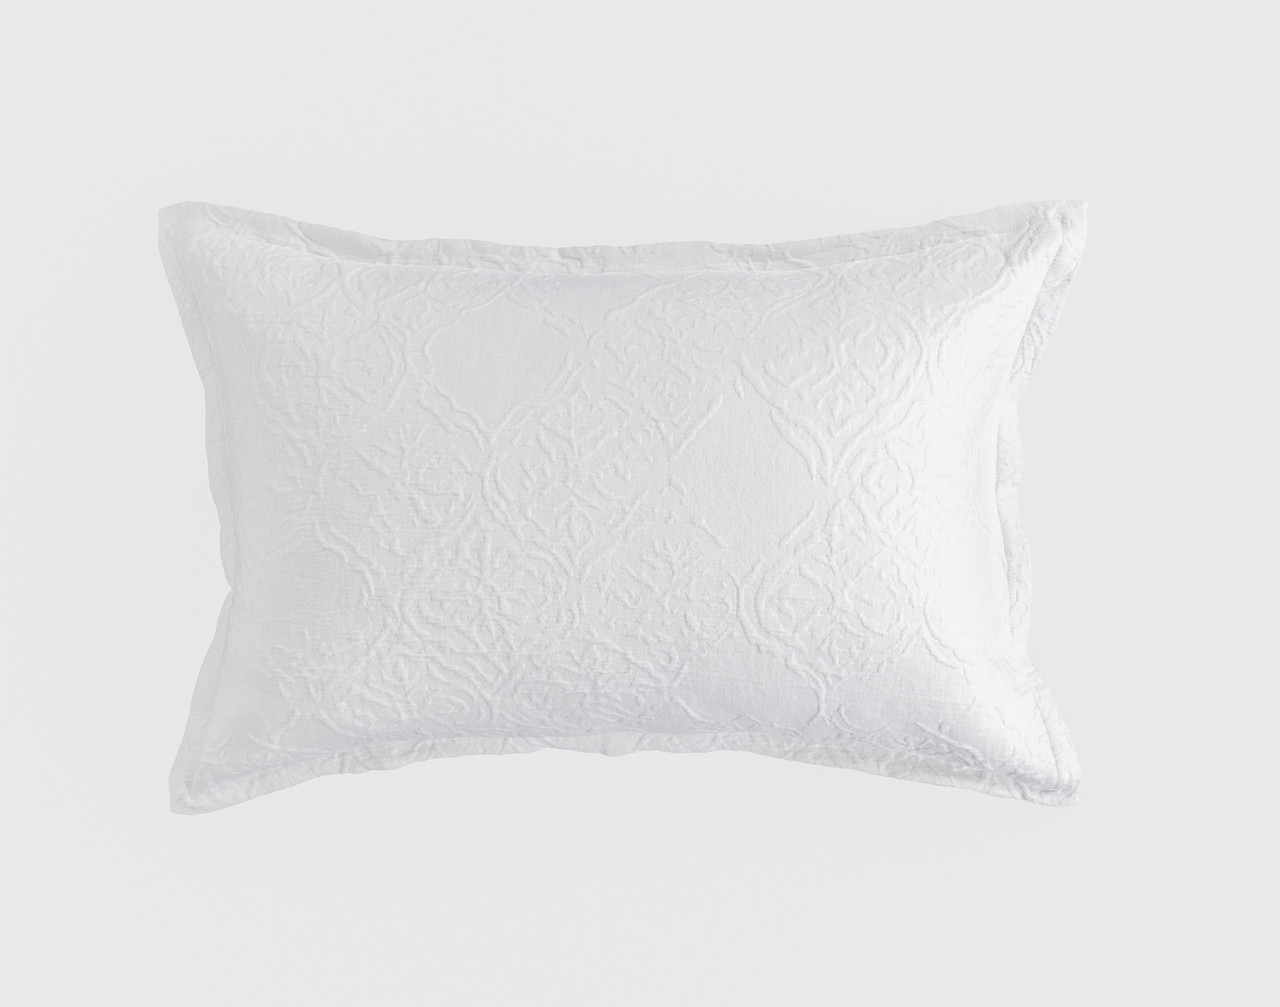 Front view of our Corinthia Pillow Sham sitting against a solid white background.